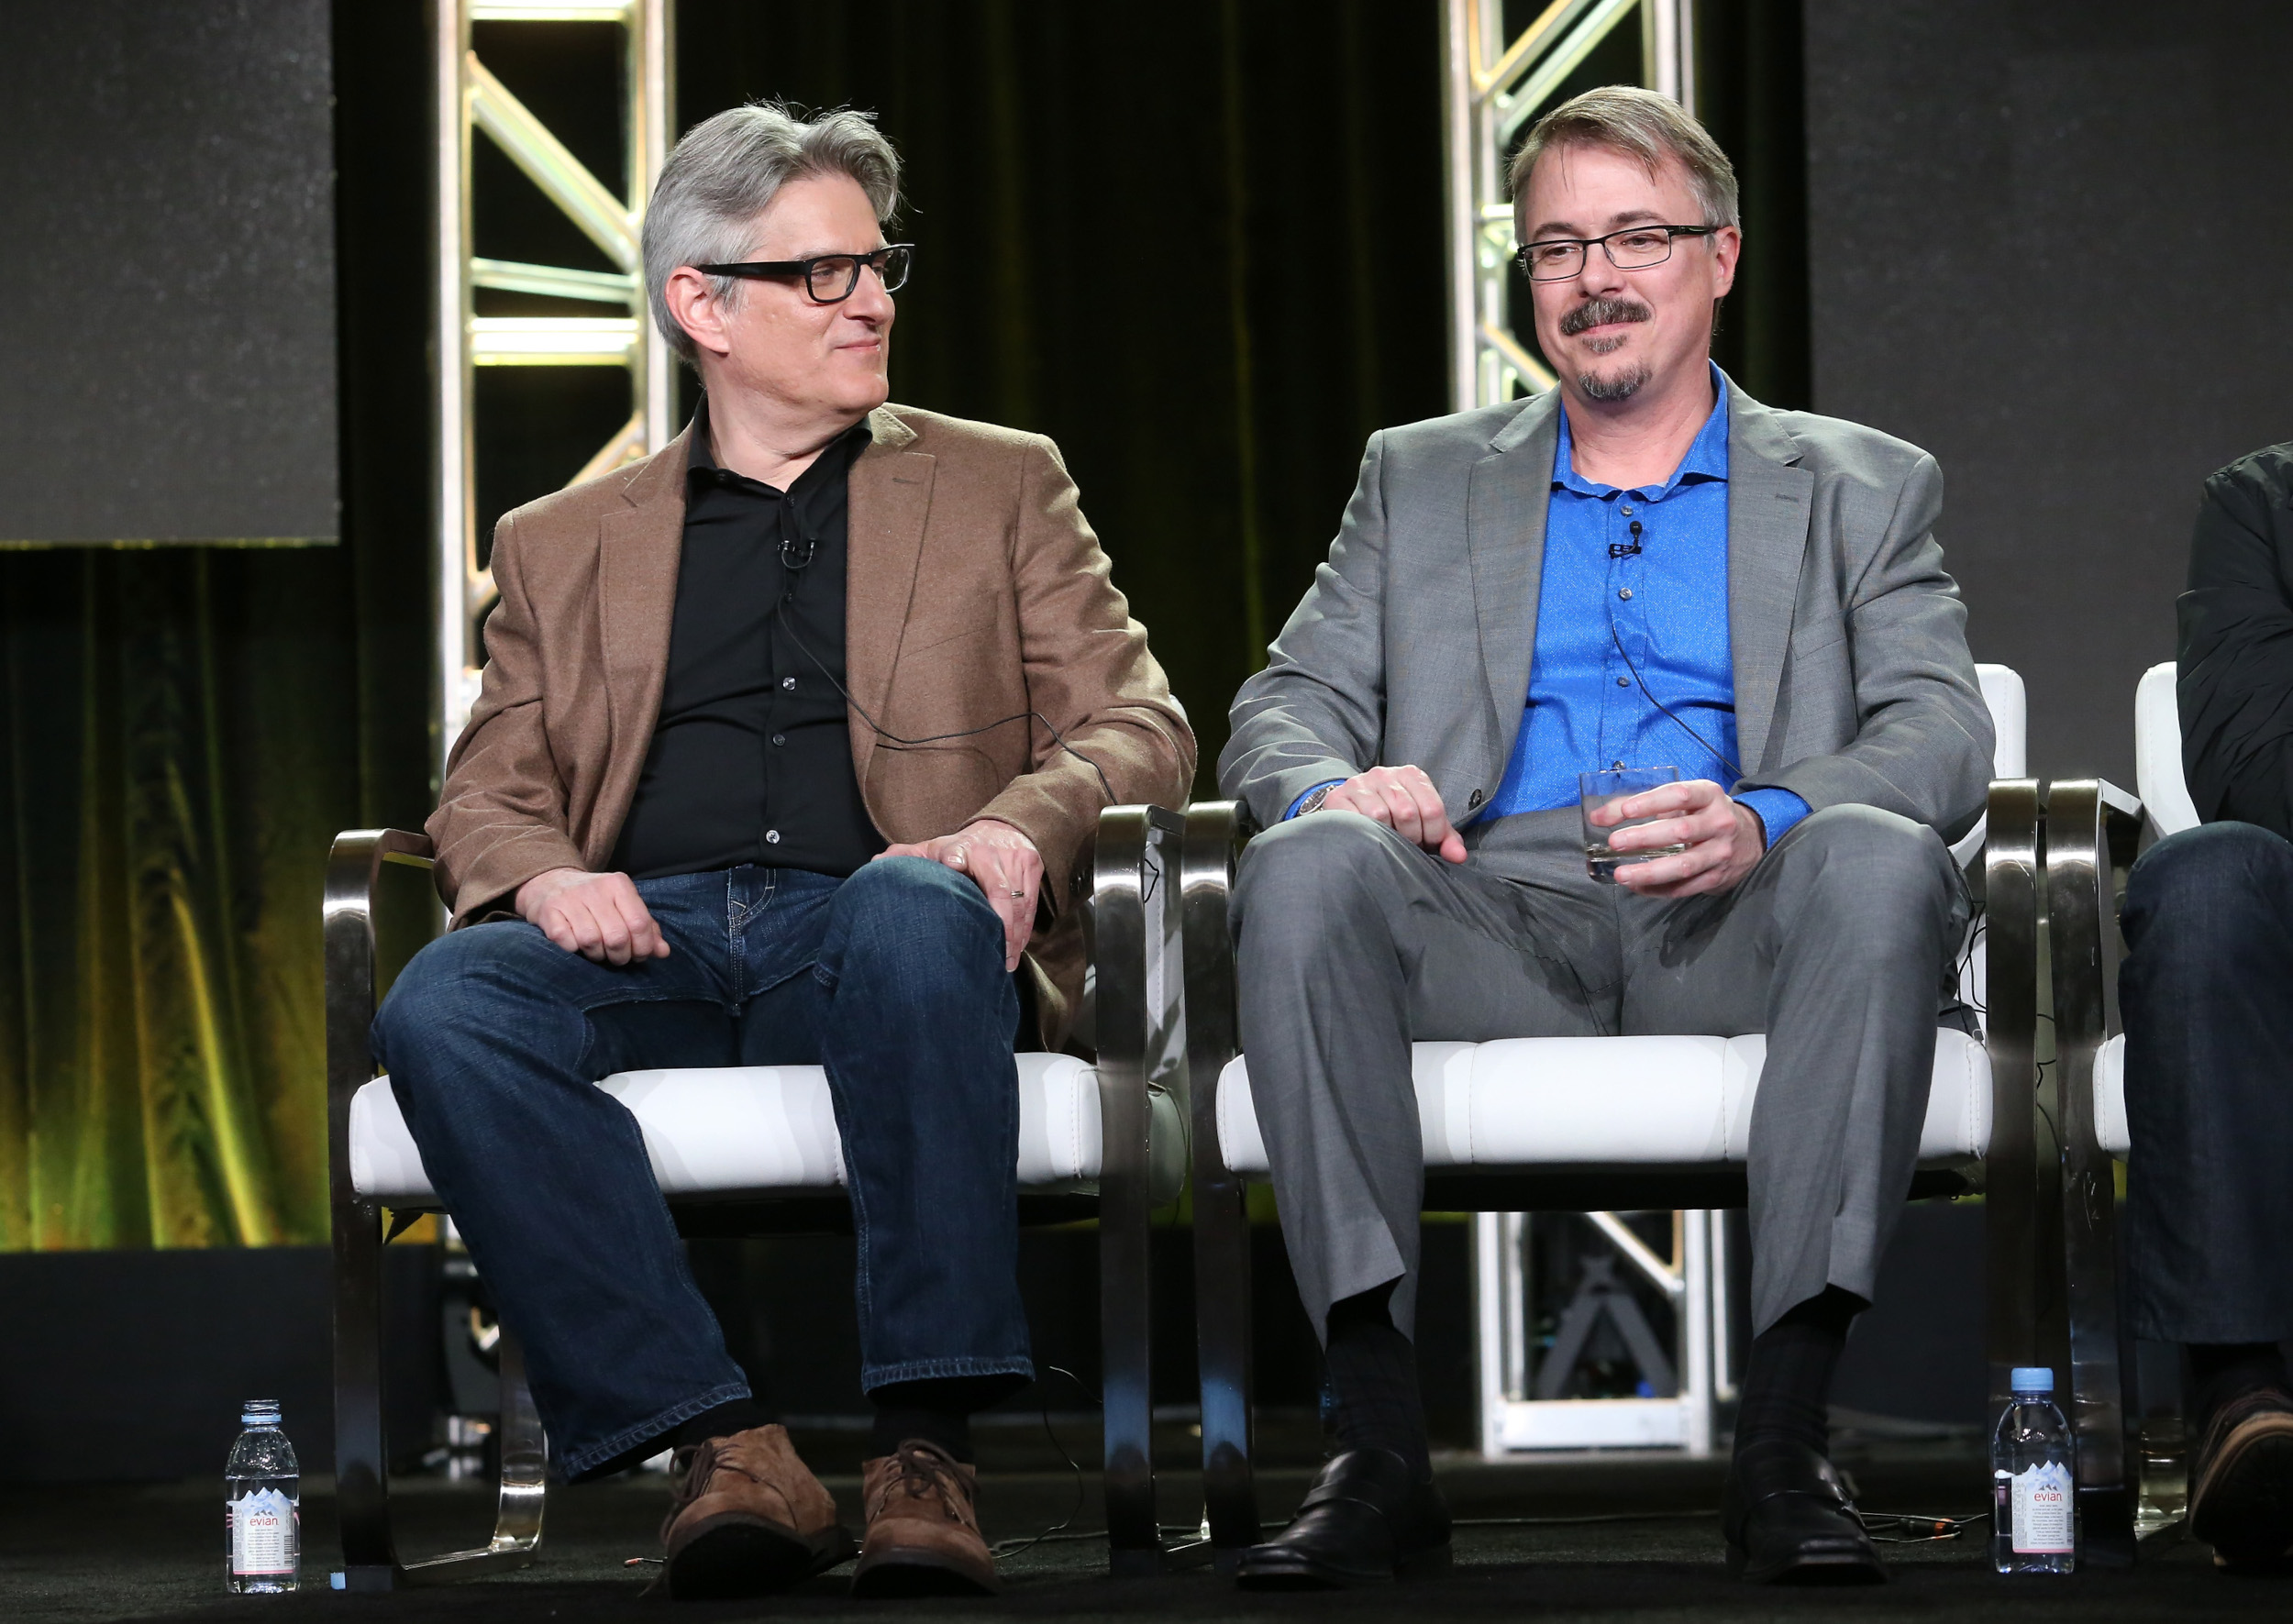 'Better Call Saul' producer Peter Gould looking at Vince Gilligan while sitting